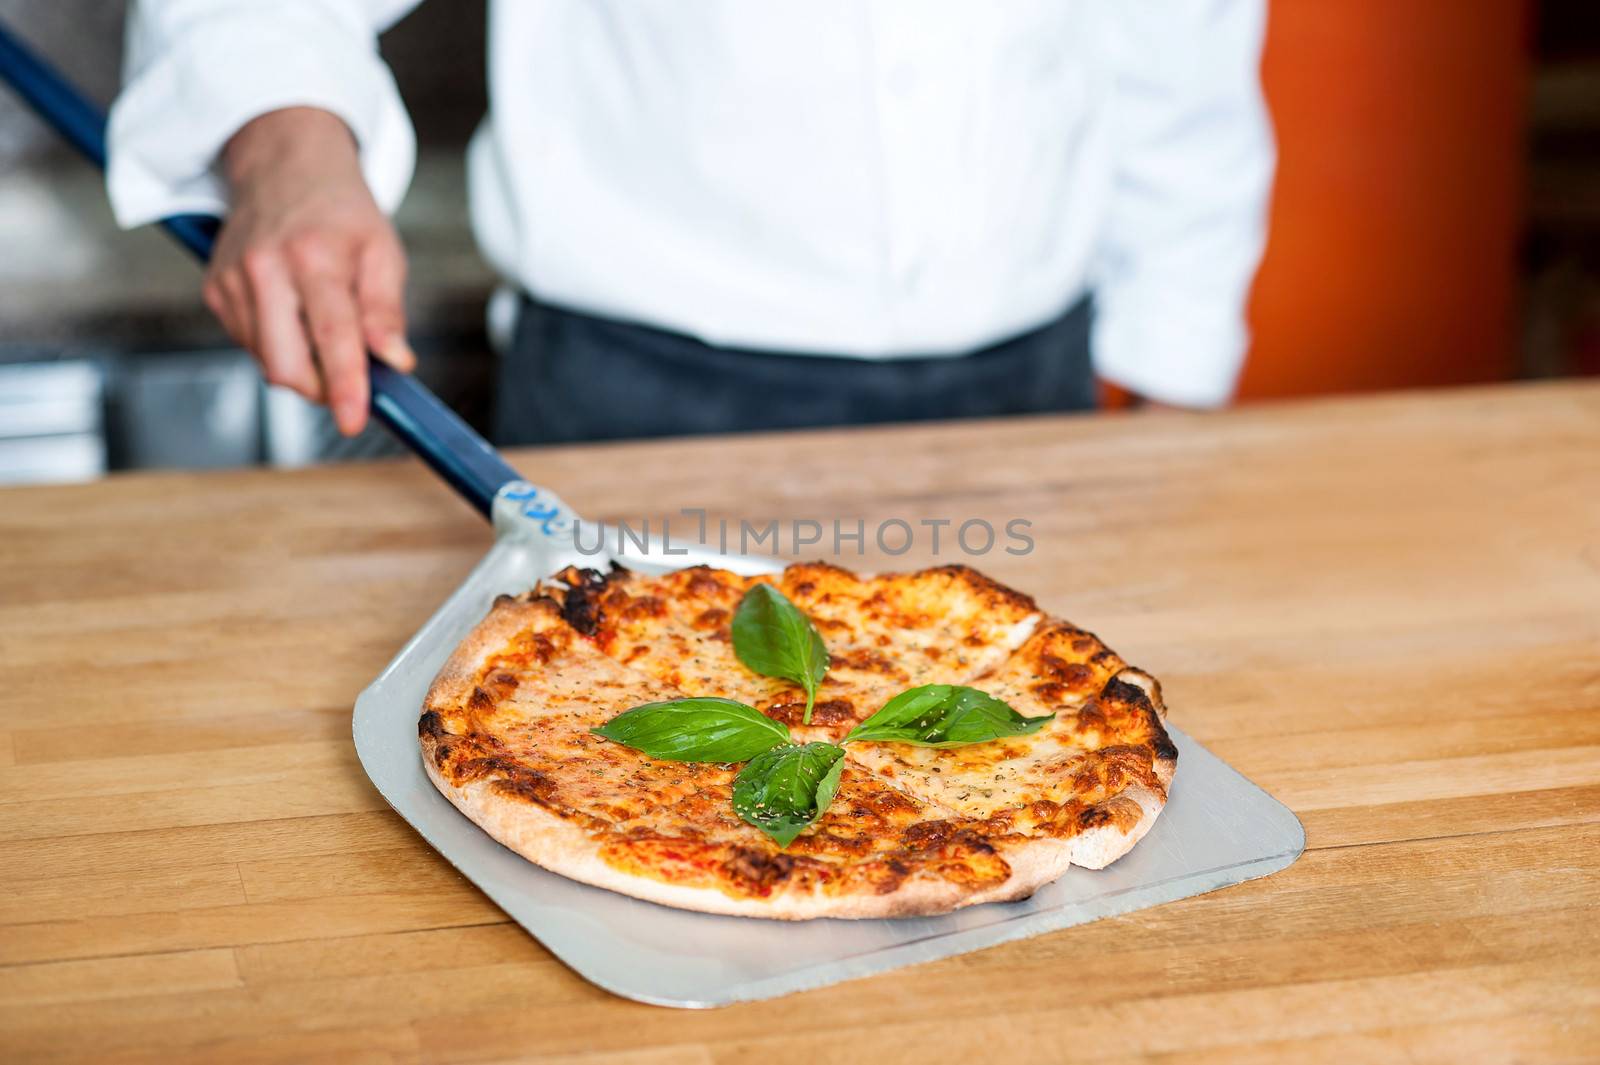 Chef placing freshly baked pizza on the table